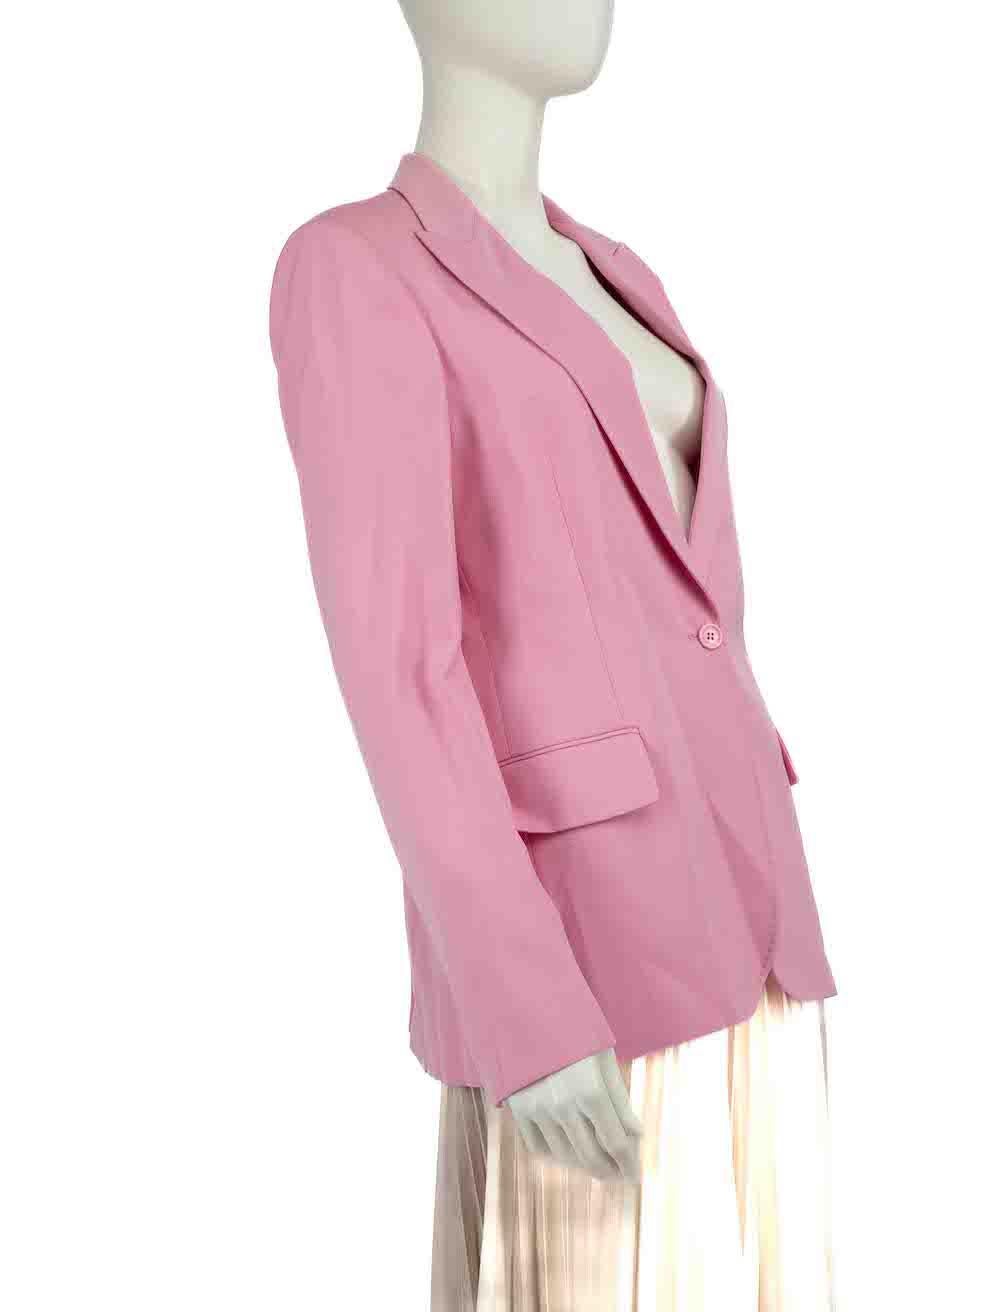 CONDITION is Never worn, with tags. No visible wear to blazer is evident on this new Stella McCartney designer resale item.
 
 
 
 Details
 
 
 Pink
 
 Wool
 
 Blazer
 
 Single breasted
 
 Shoulder padded
 
 Buttoned cuffs
 
 1x Chest pocket
 
 2x